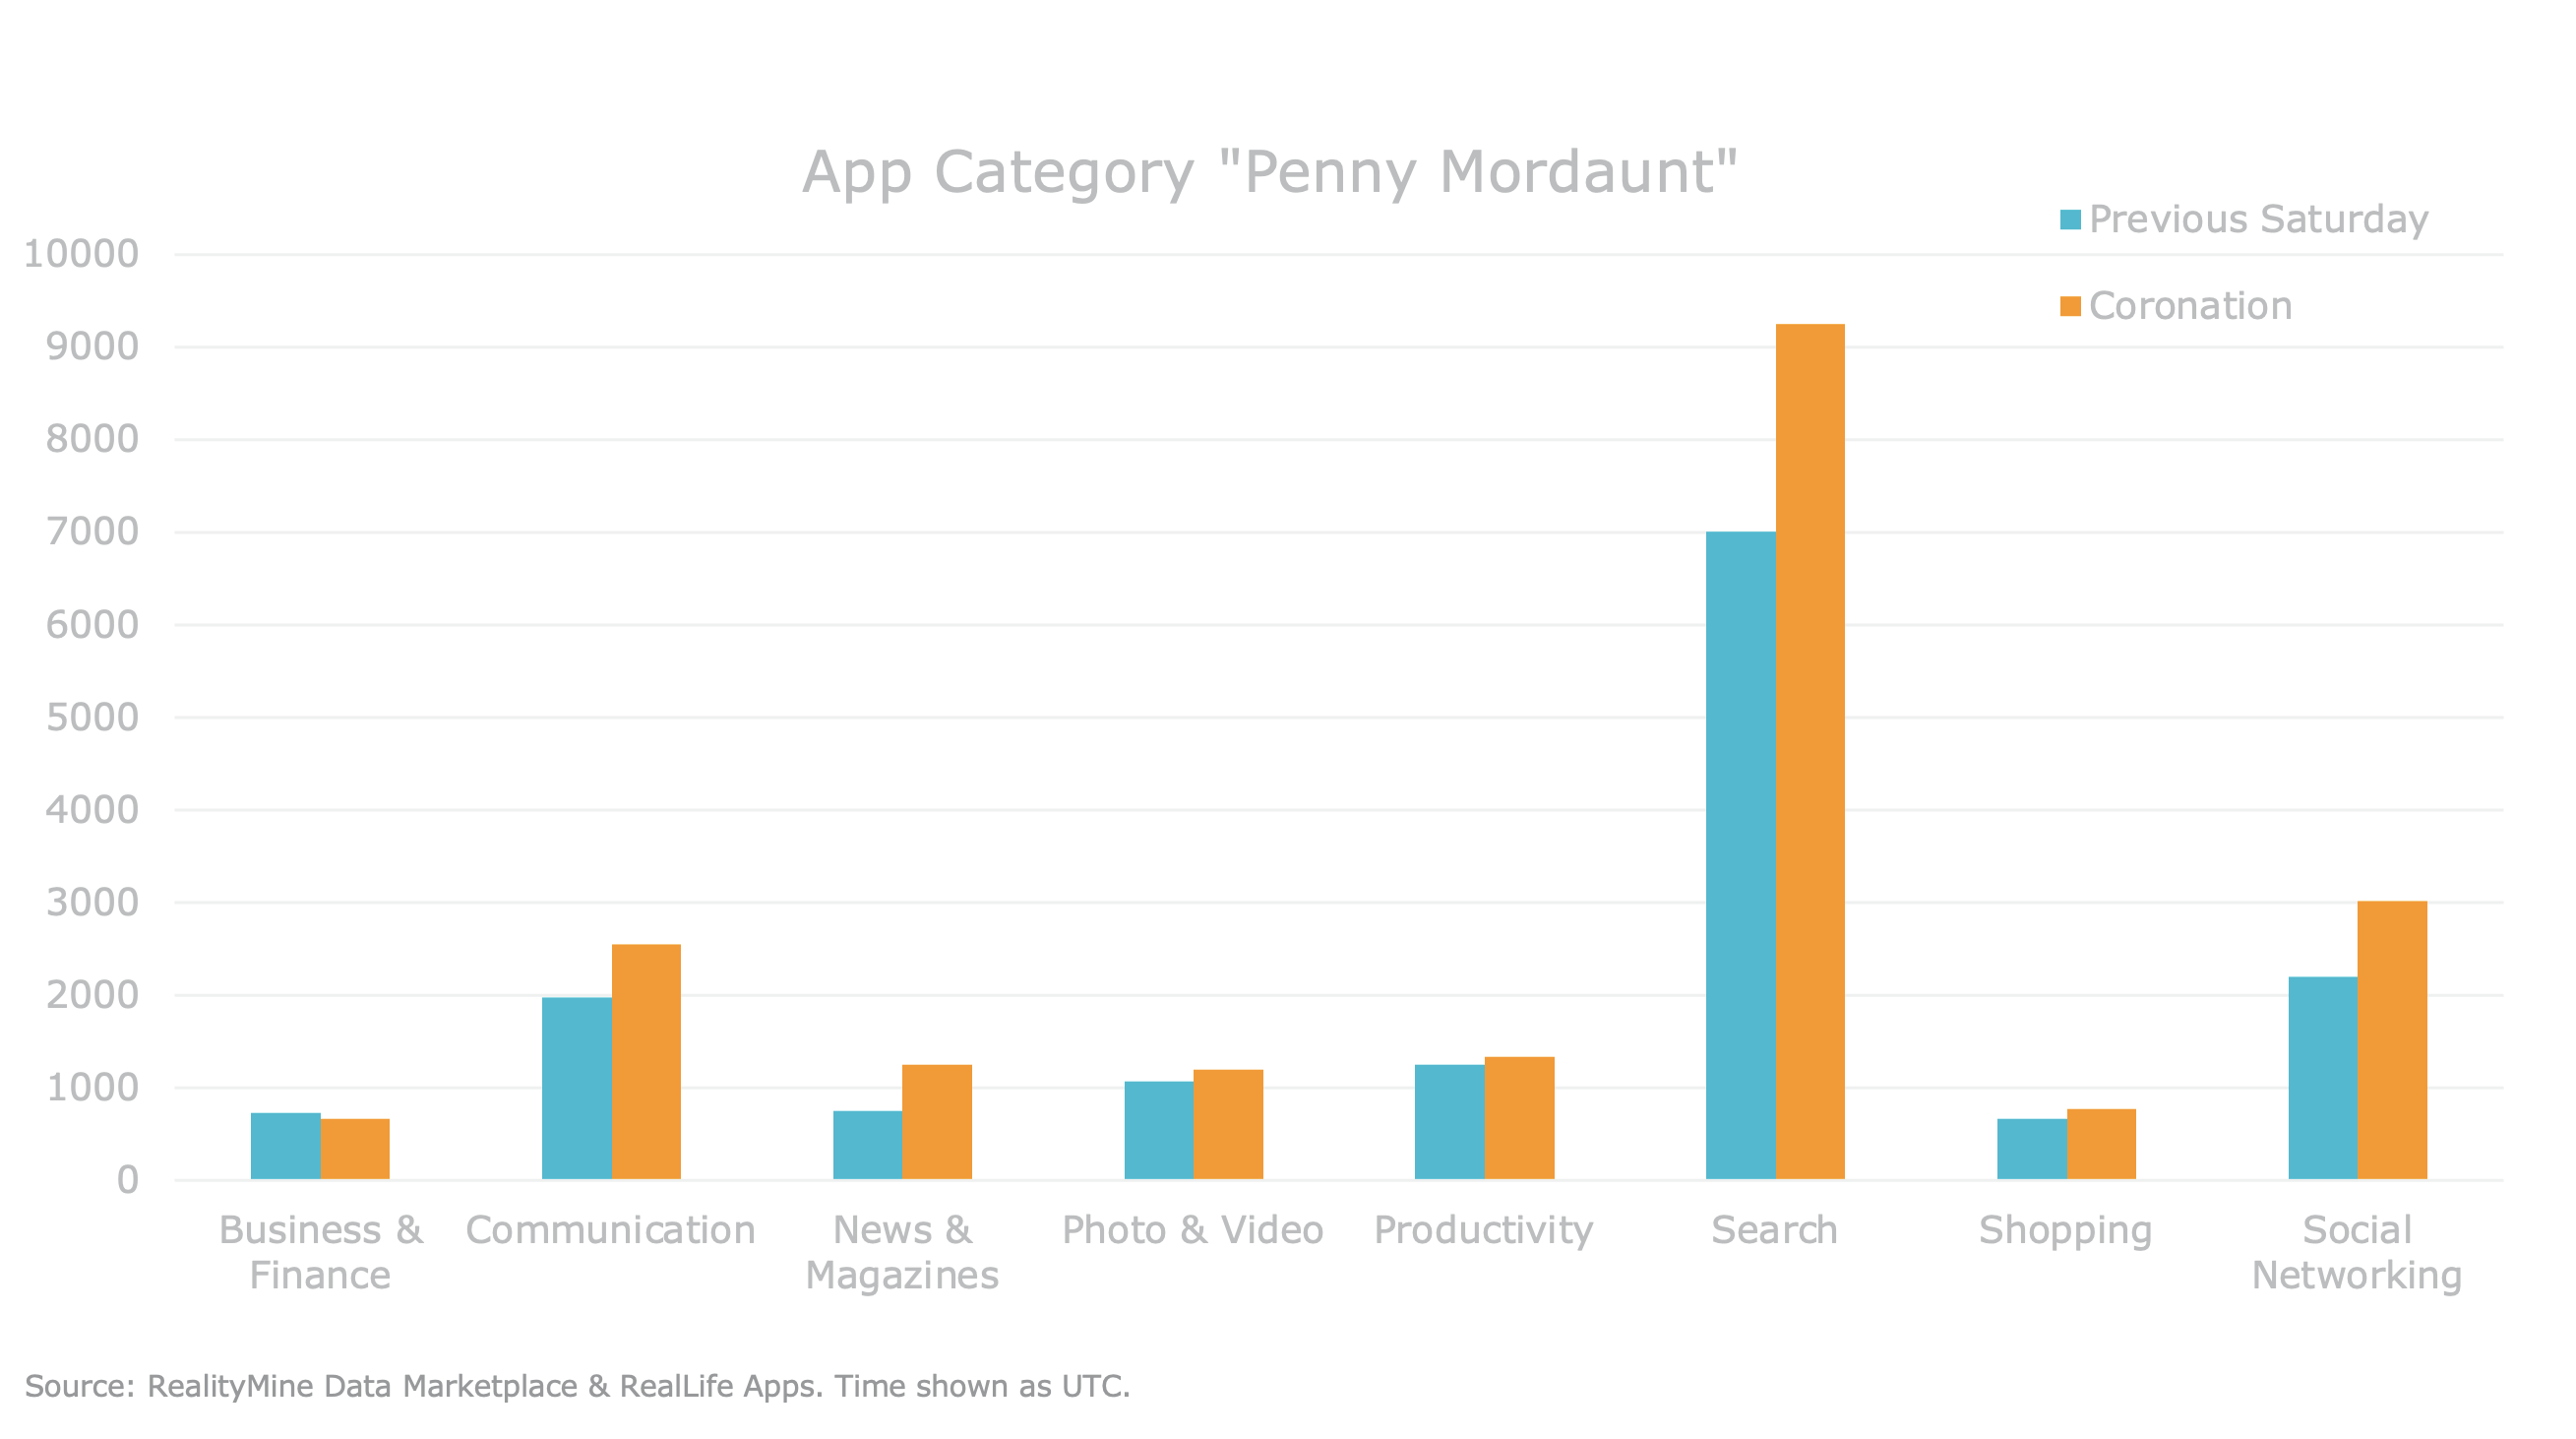 Bar chart showing the categories of apps used by those who searched Penny Mordaunt online during the Coronation of King Charles III. Teal bars show previous Saturday data, and orange bars show data from 6th May 2023.